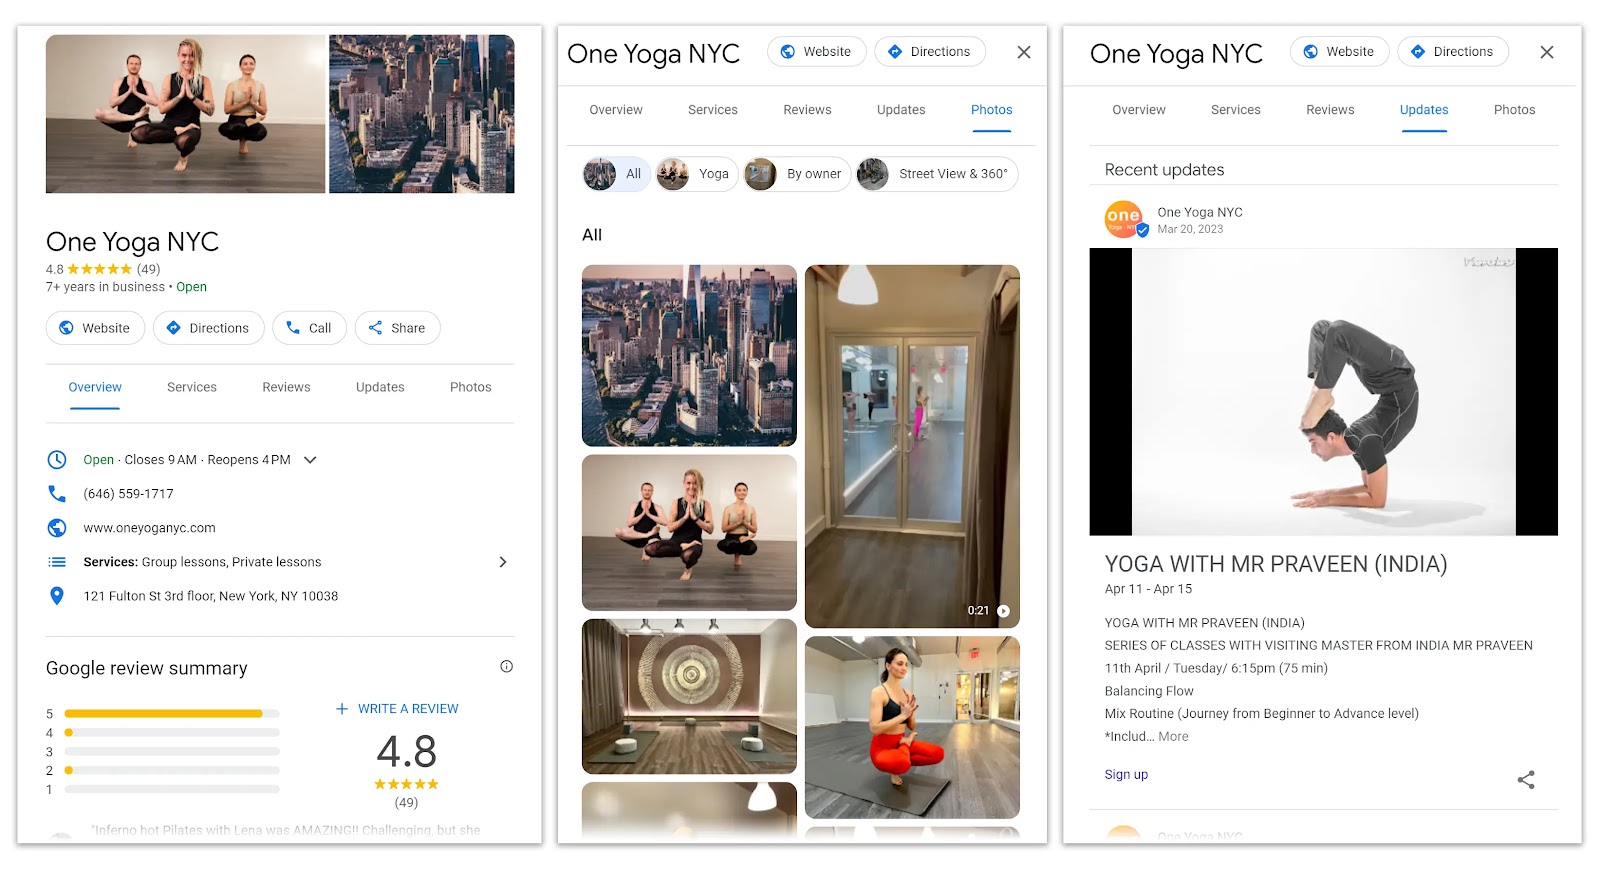 "One Yoga NYC" Google Business Profile page